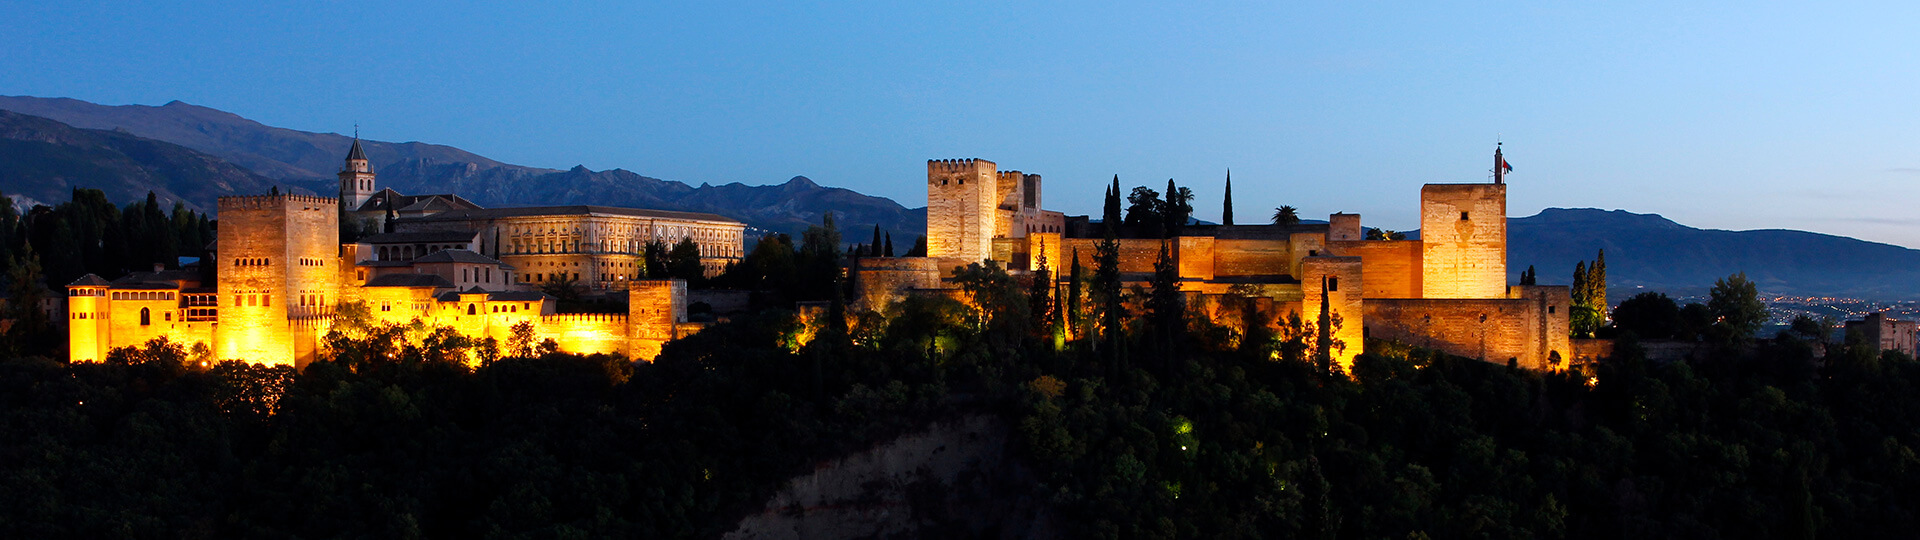 View of the Alhambra in Granada by night